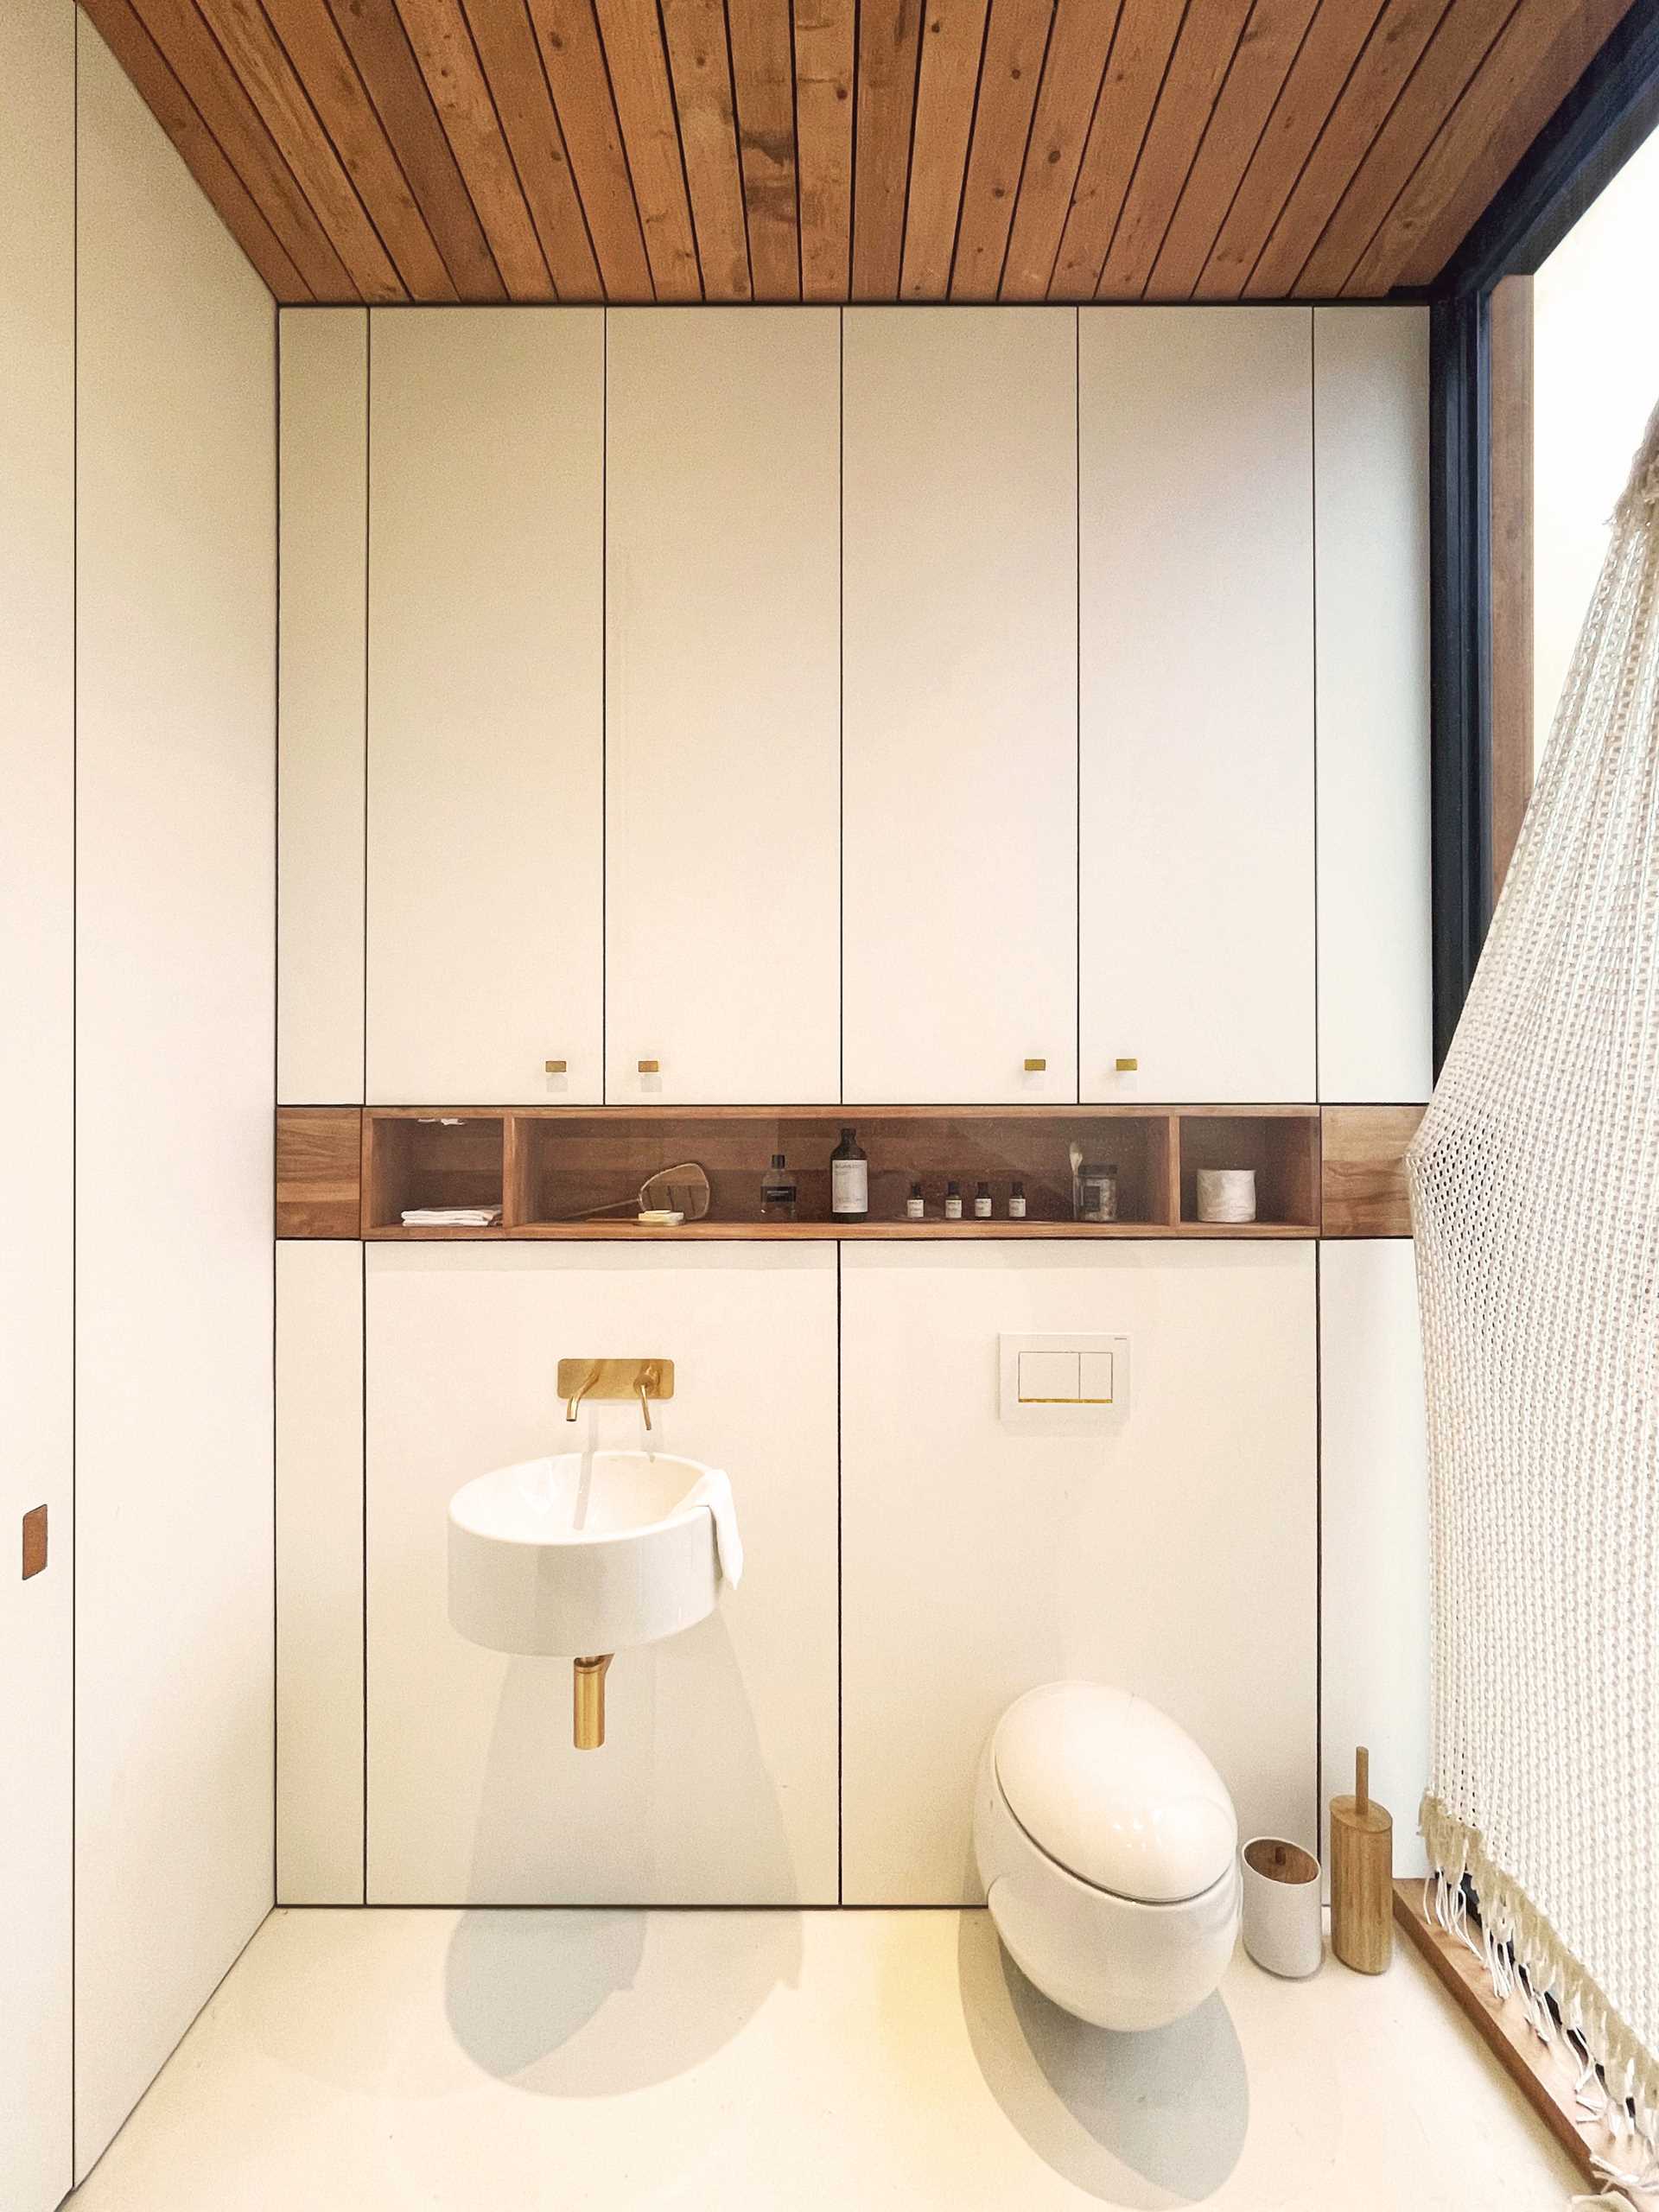 A modern bathroom with minimalist cabinets, a wood shelving niche, and bronze hardware.